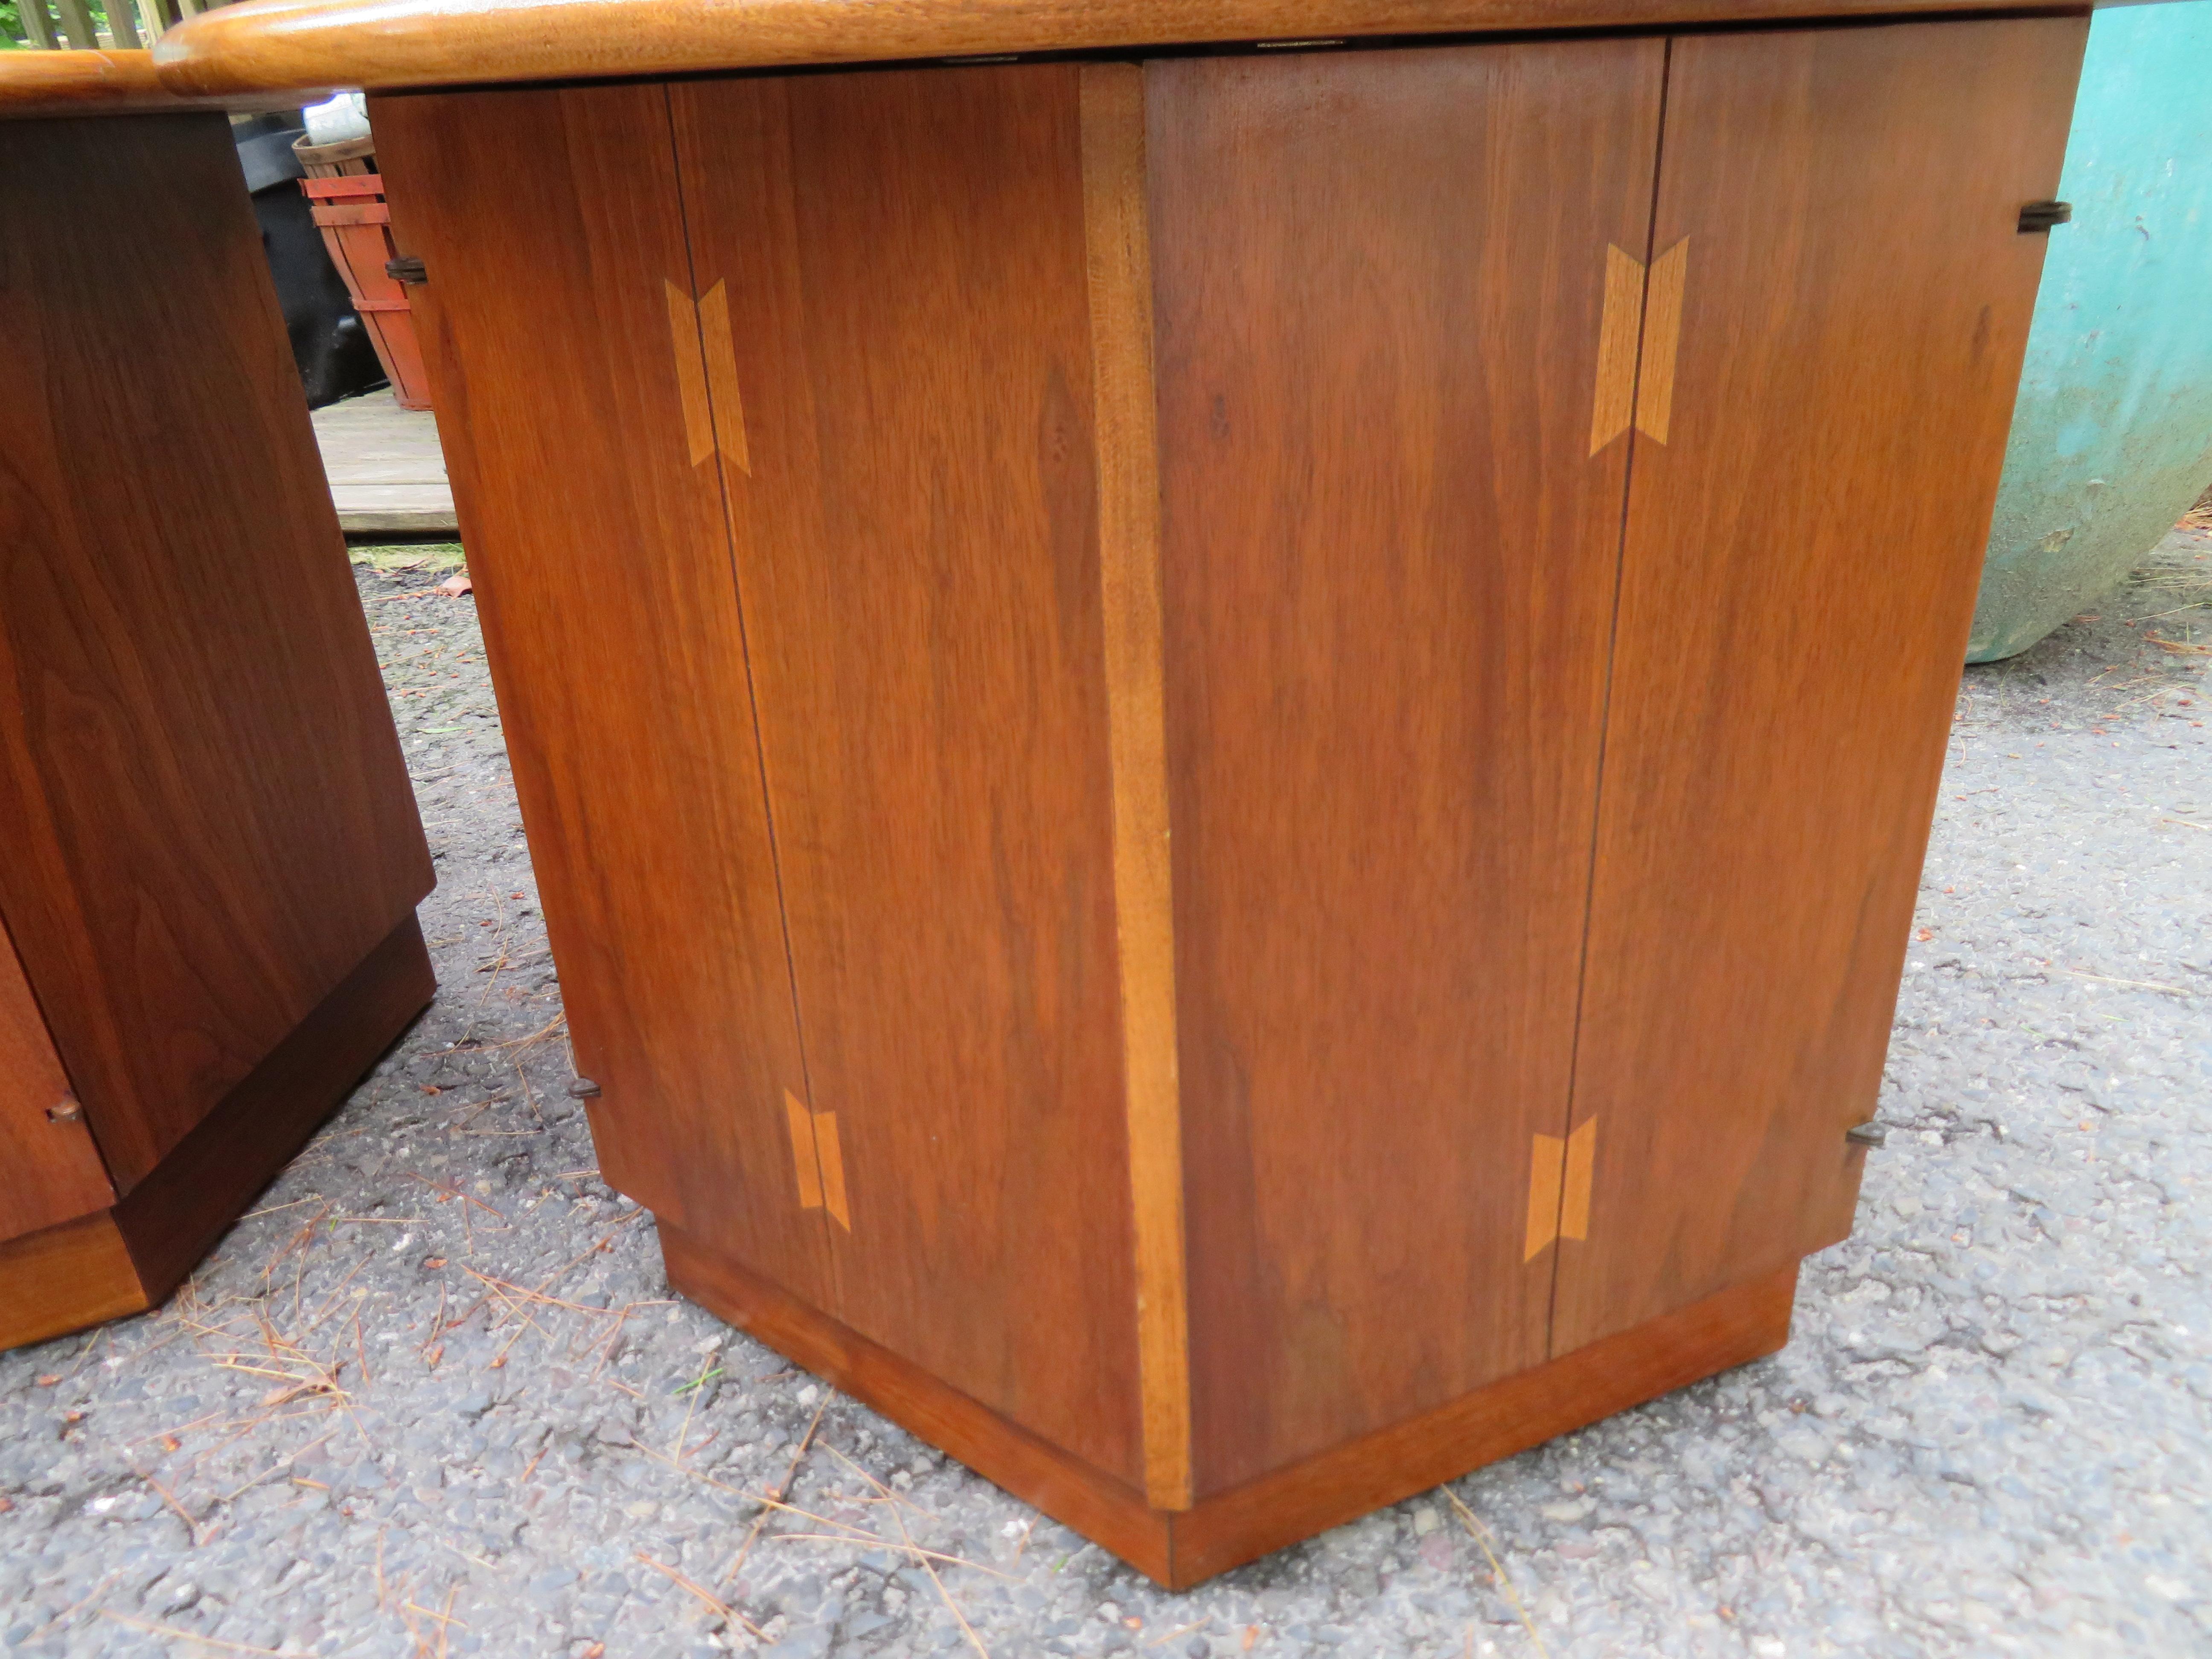 Lovely Pair Andre Bus Lane Acclaim Drum End Side Table, Mid-Century Modern In Good Condition For Sale In Pemberton, NJ